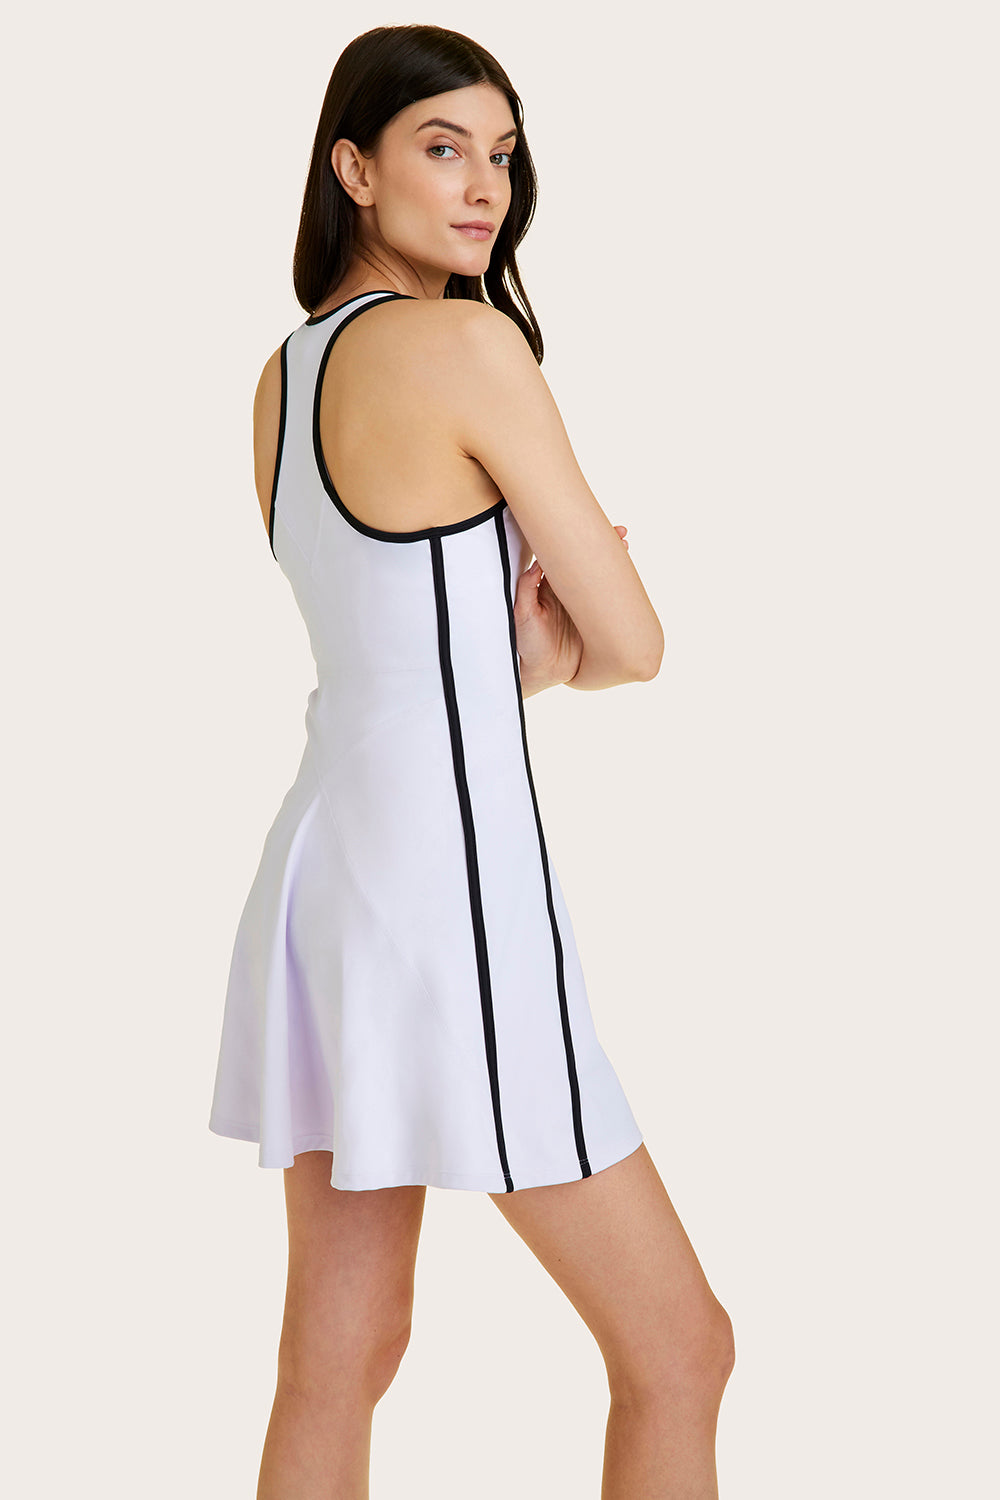 Alala women's tennis dress in white with black details